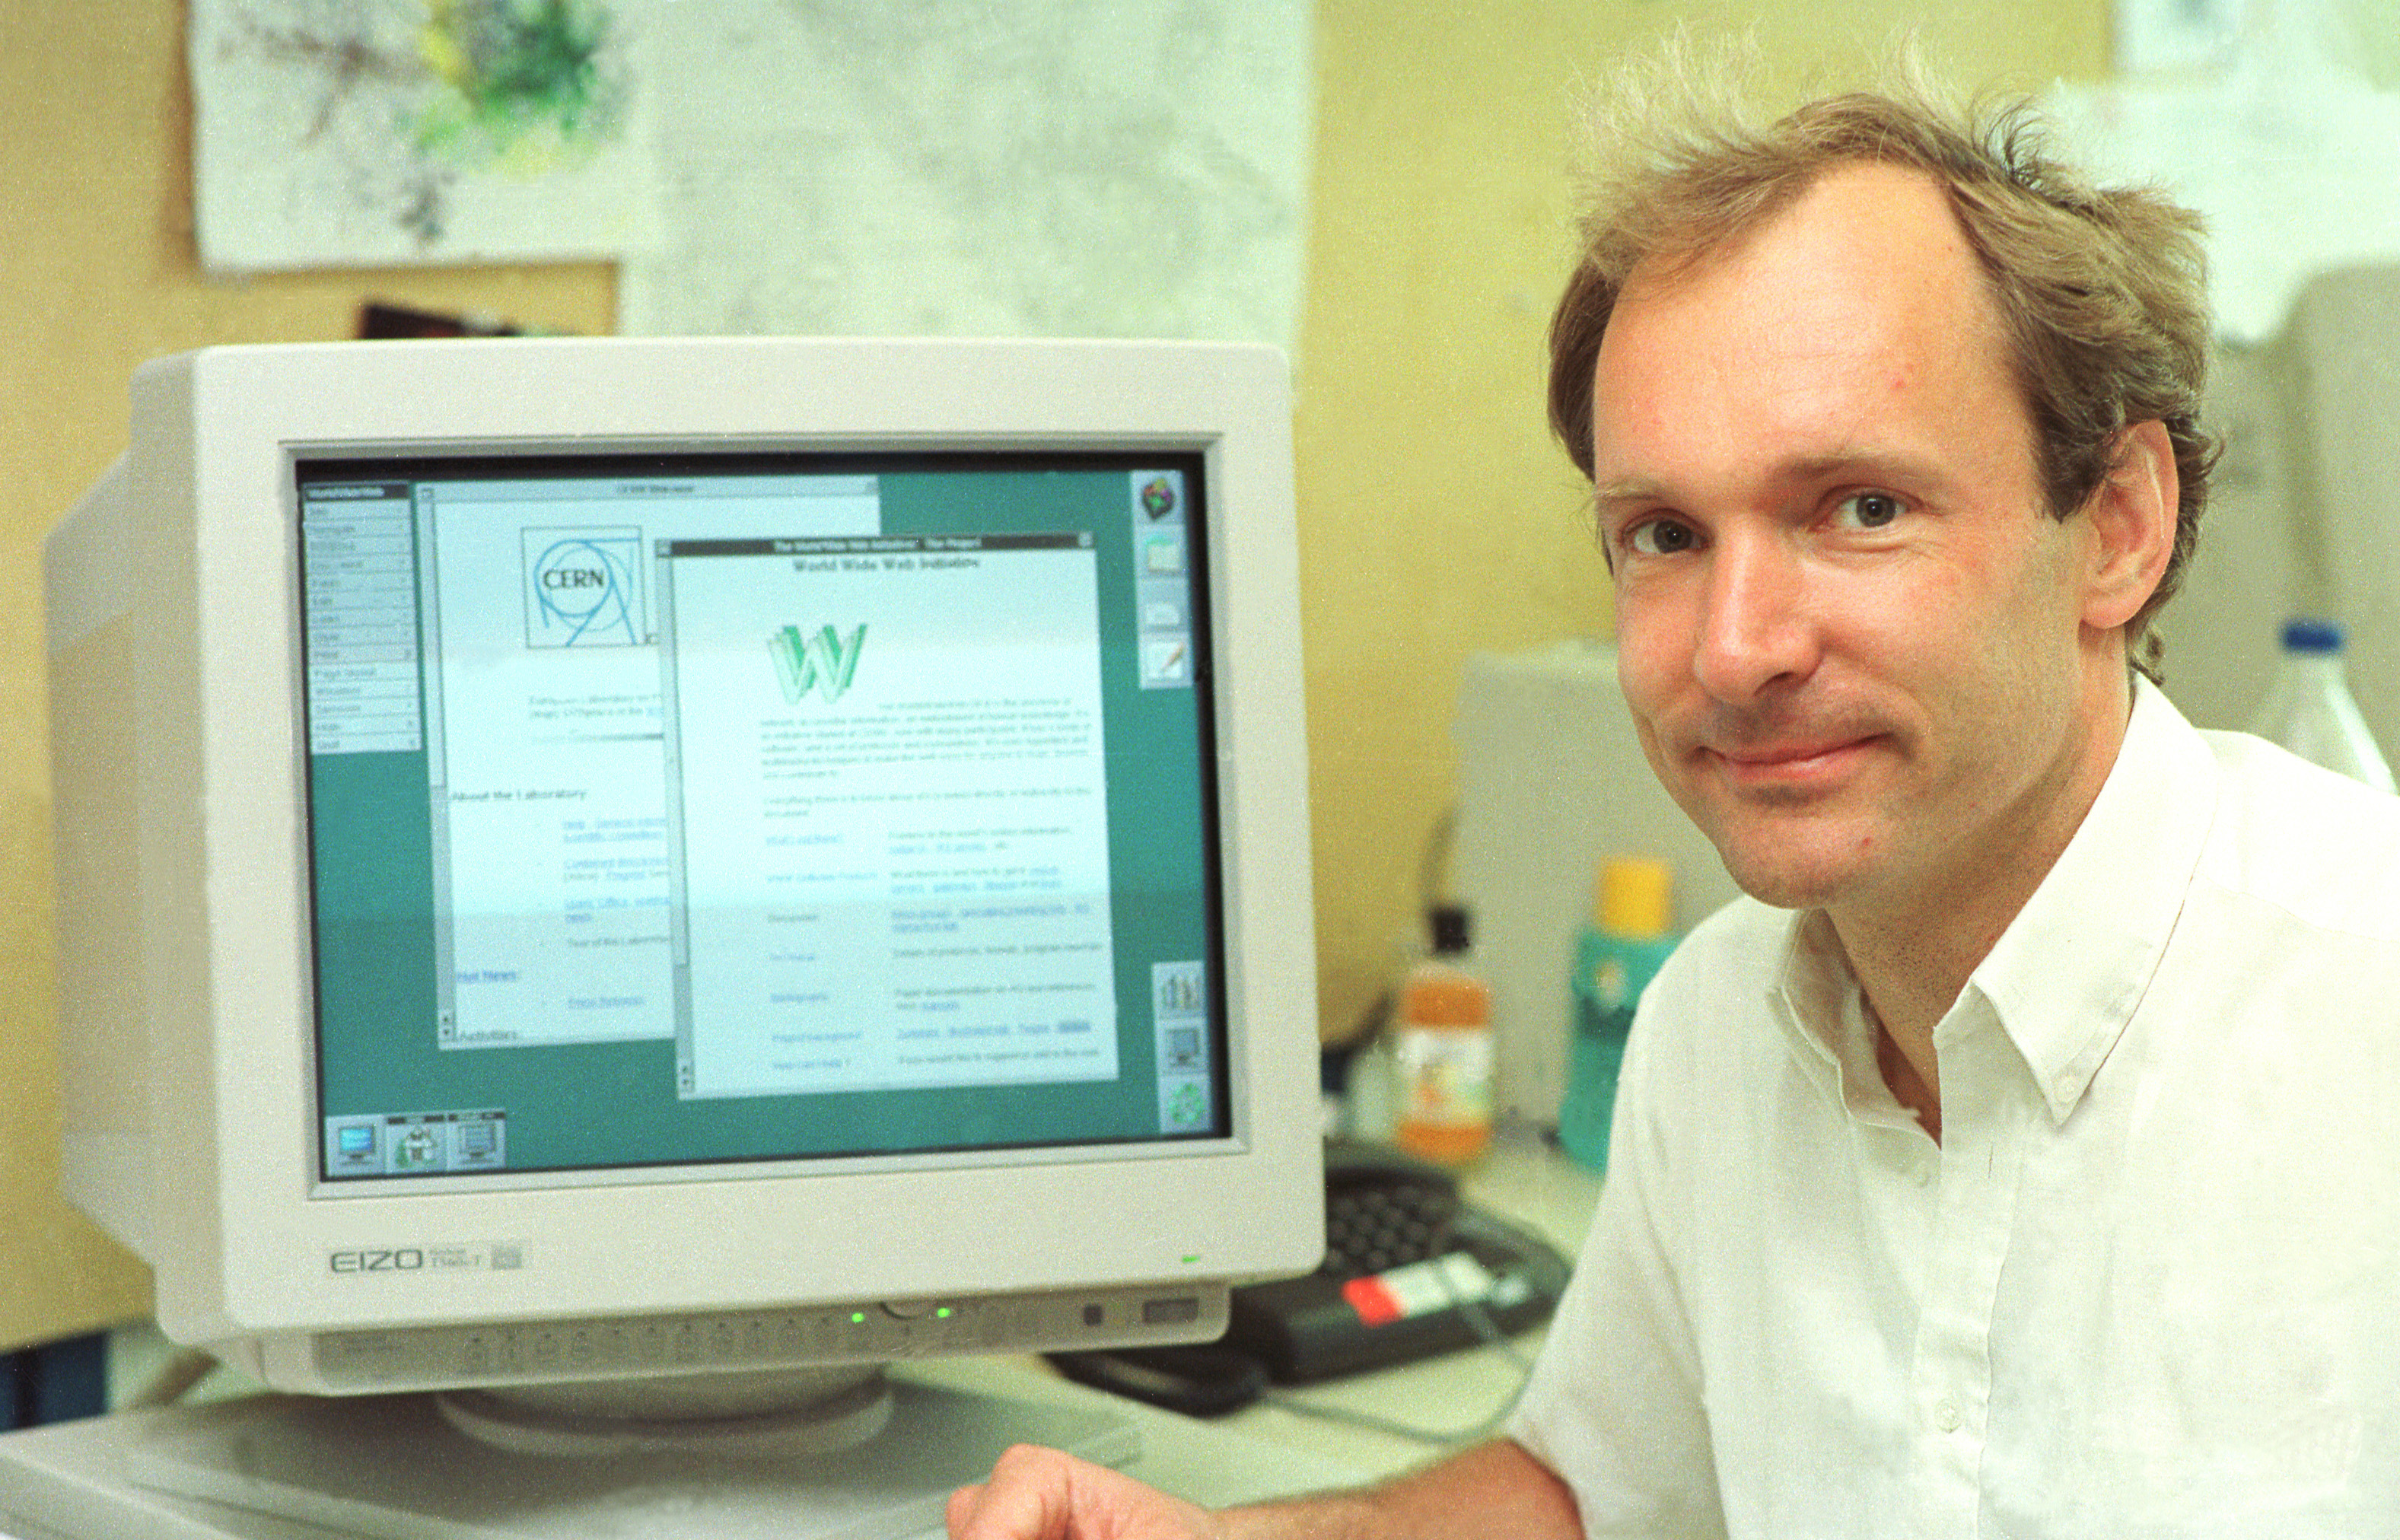 A young Tim Berners-Lee sits in front of an old style computer monitor. Source: CERN